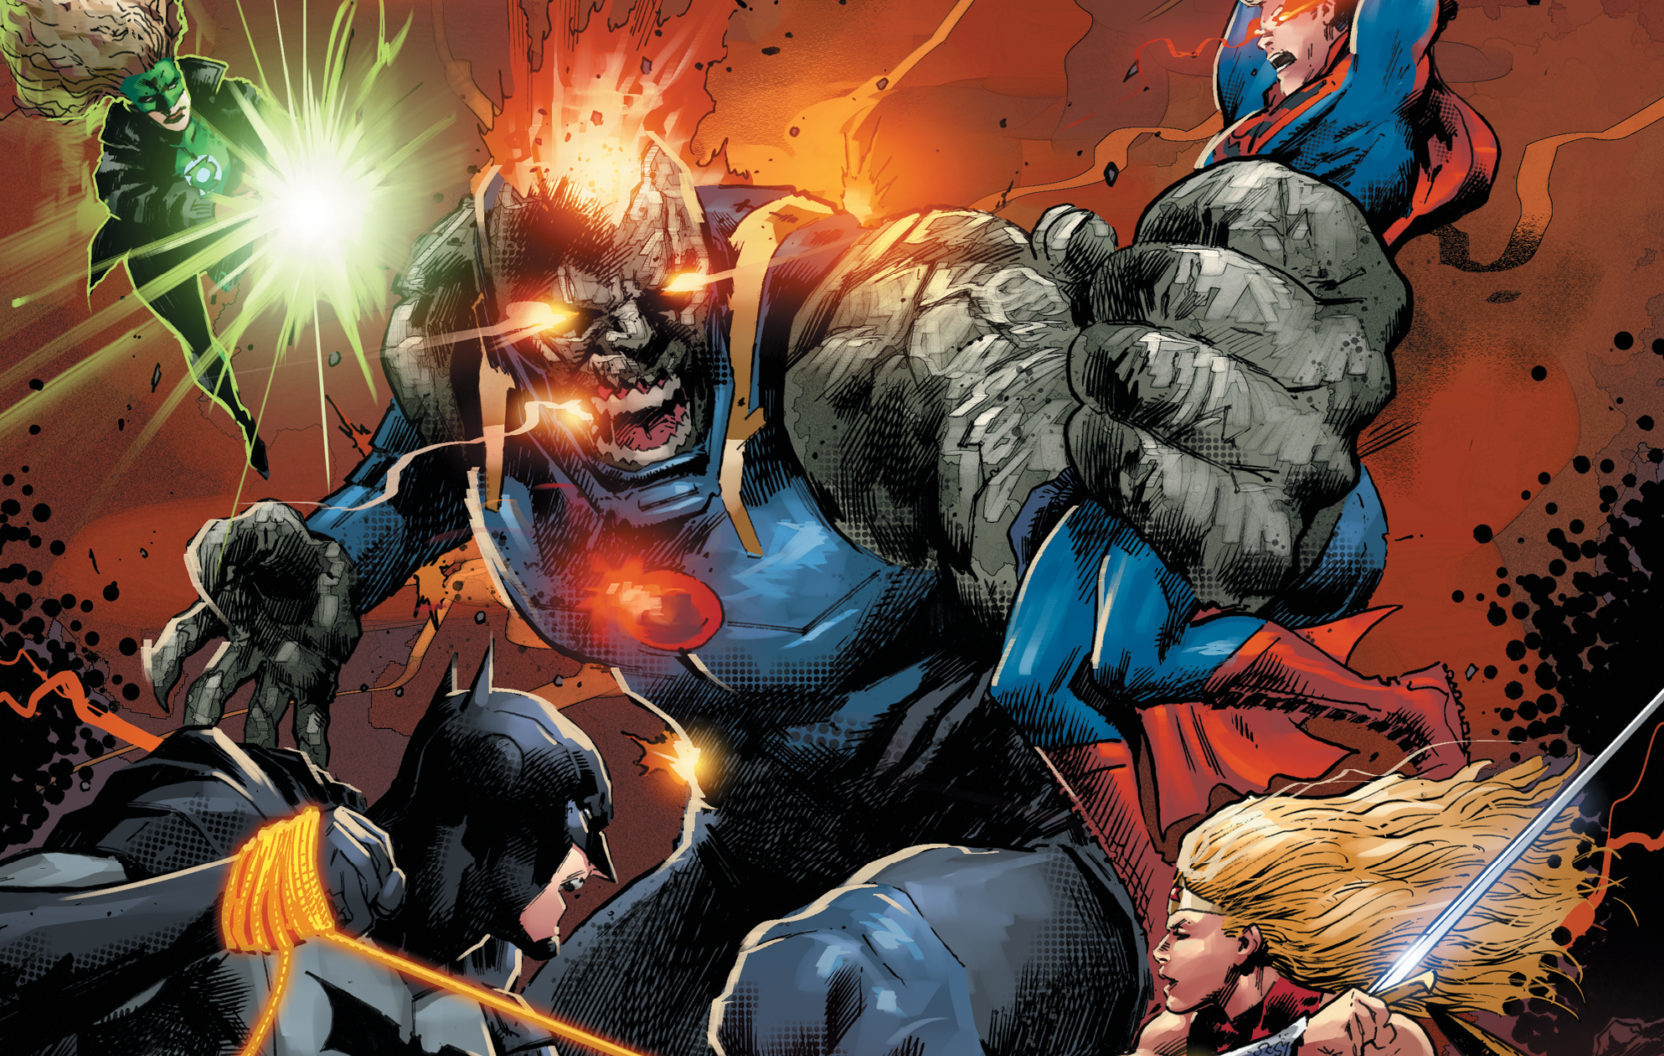 DCeased War of the Undead Gods | Tom Taylor and Trevor Hairsine Return For This Epic Last Chapter